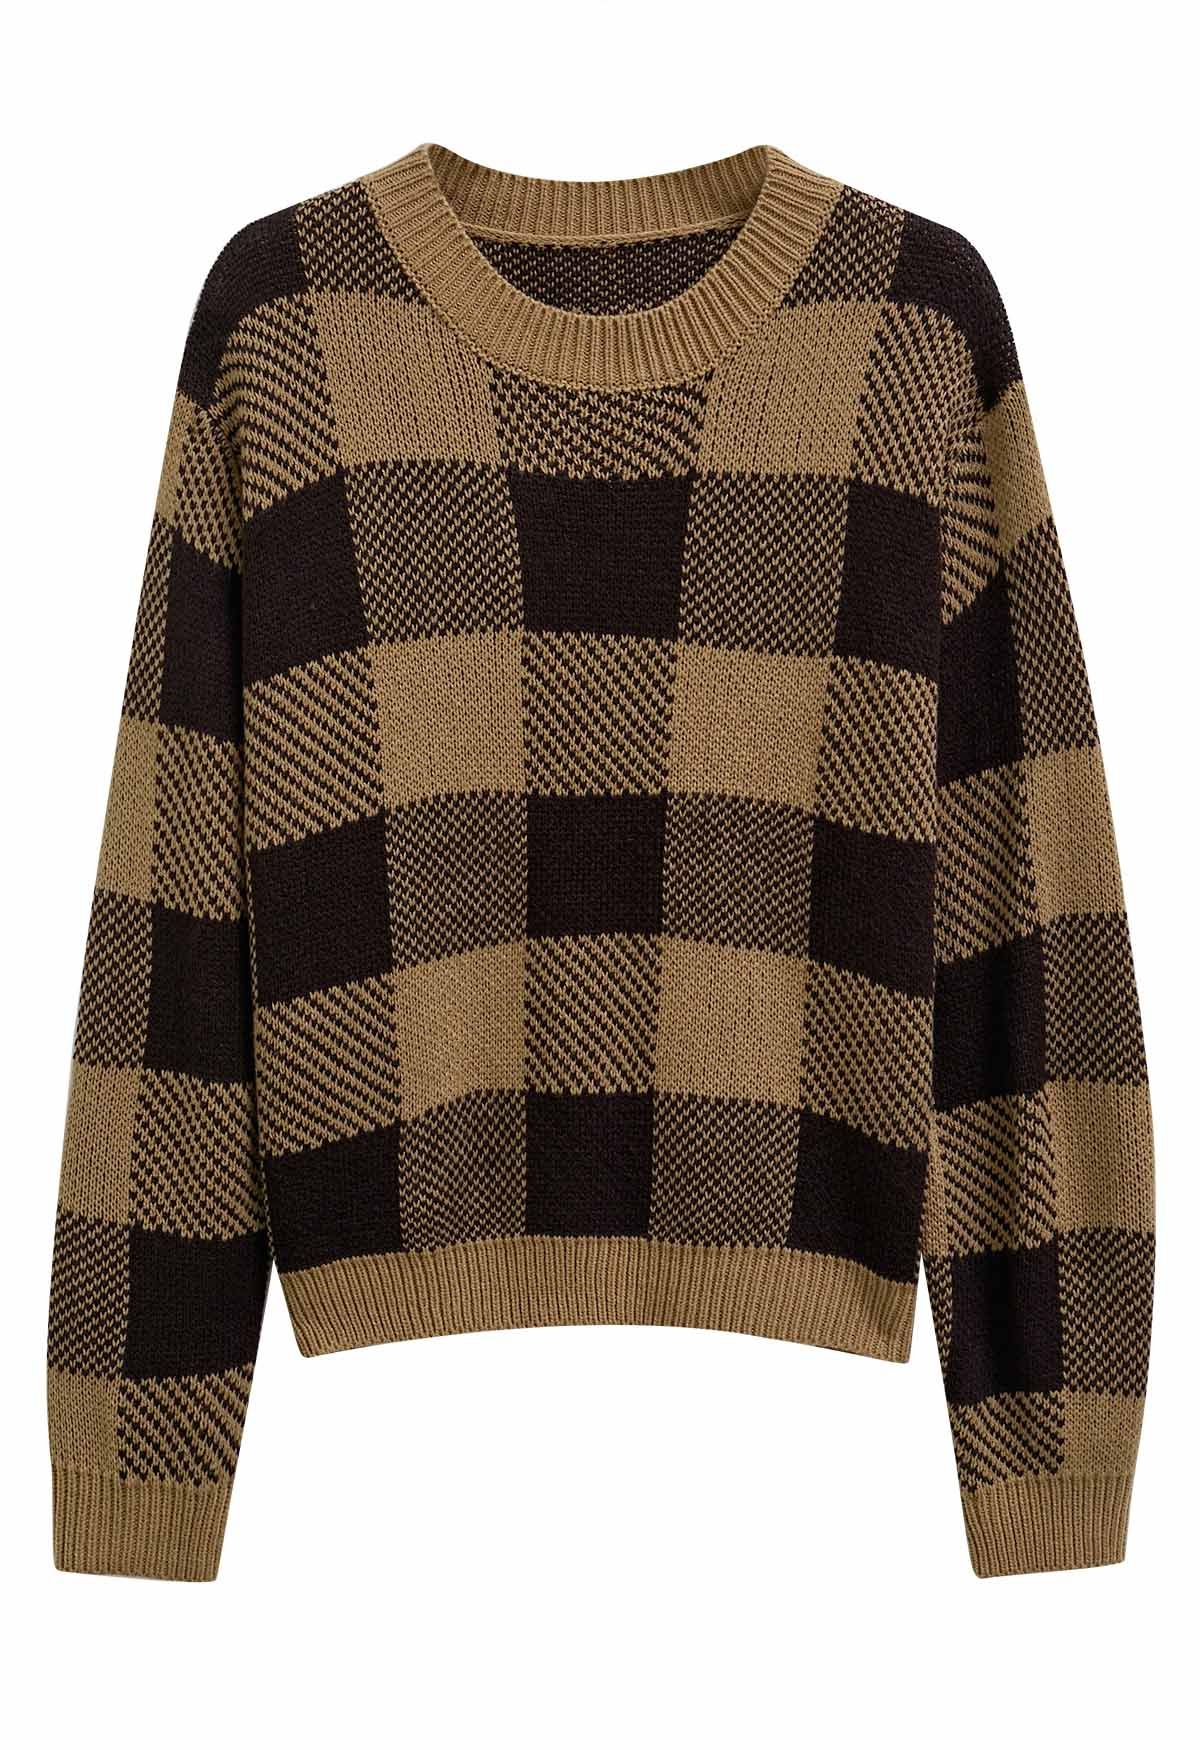 Houndstooth Check Pattern Knit Sweater